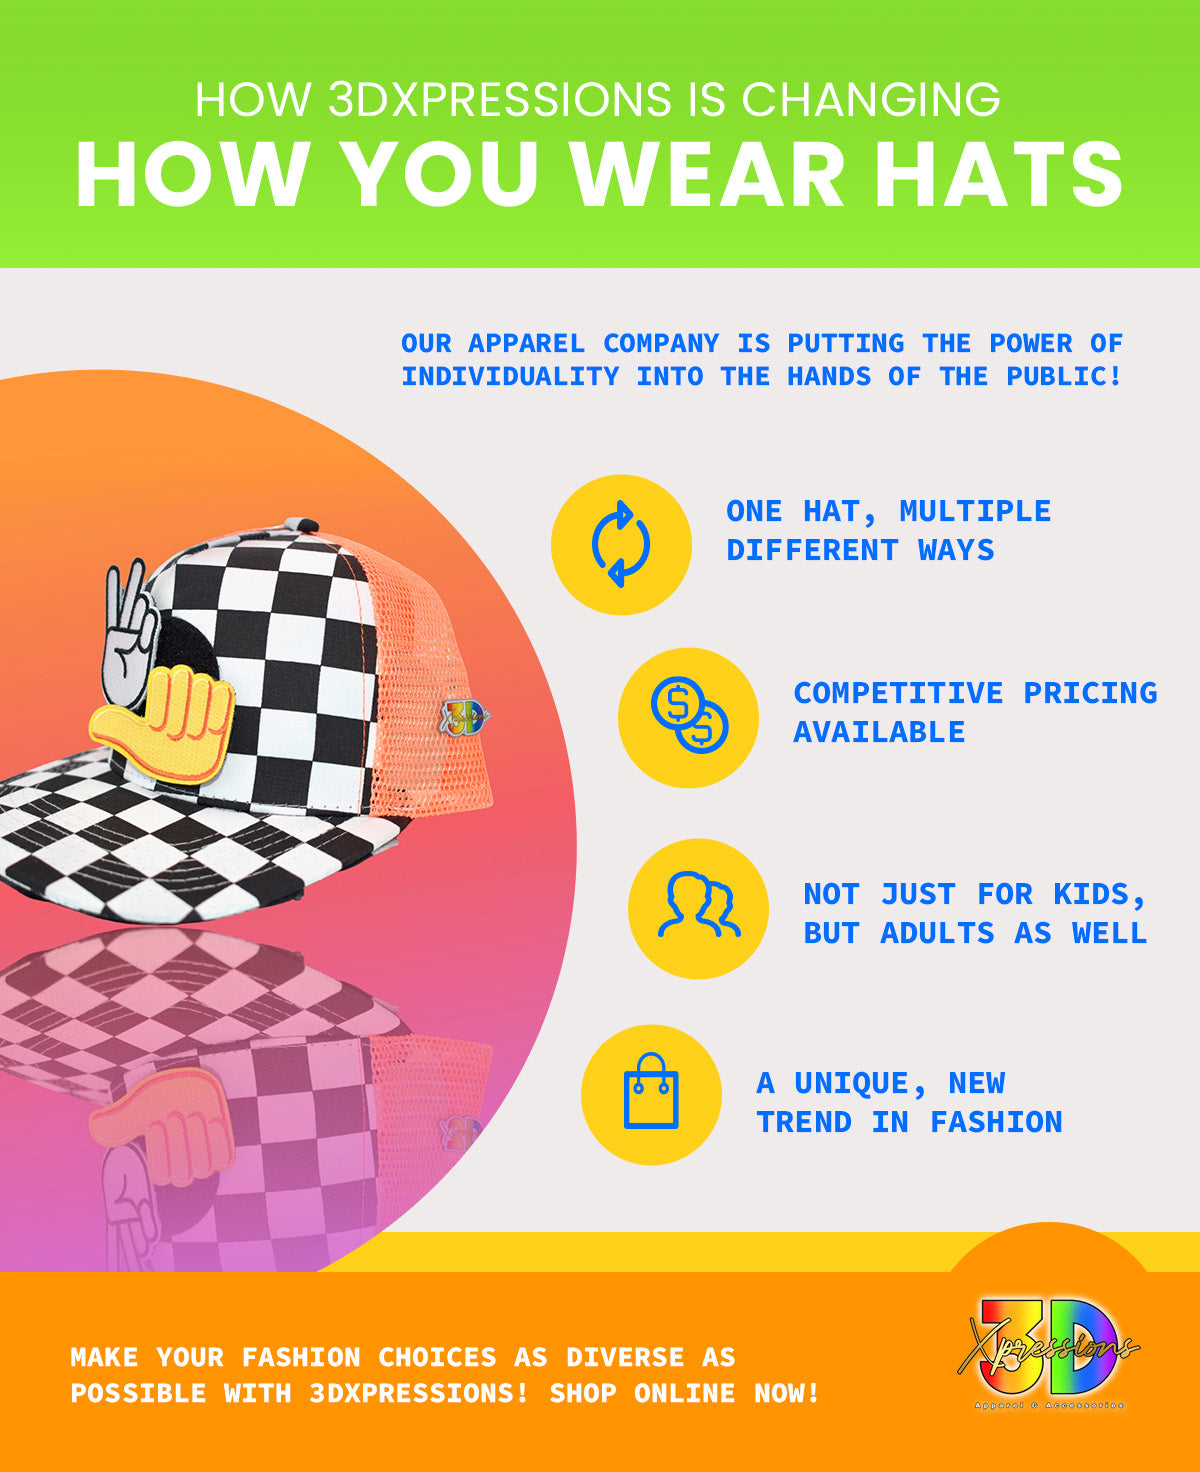 How 3DXpressions Is Changing how you wear hats